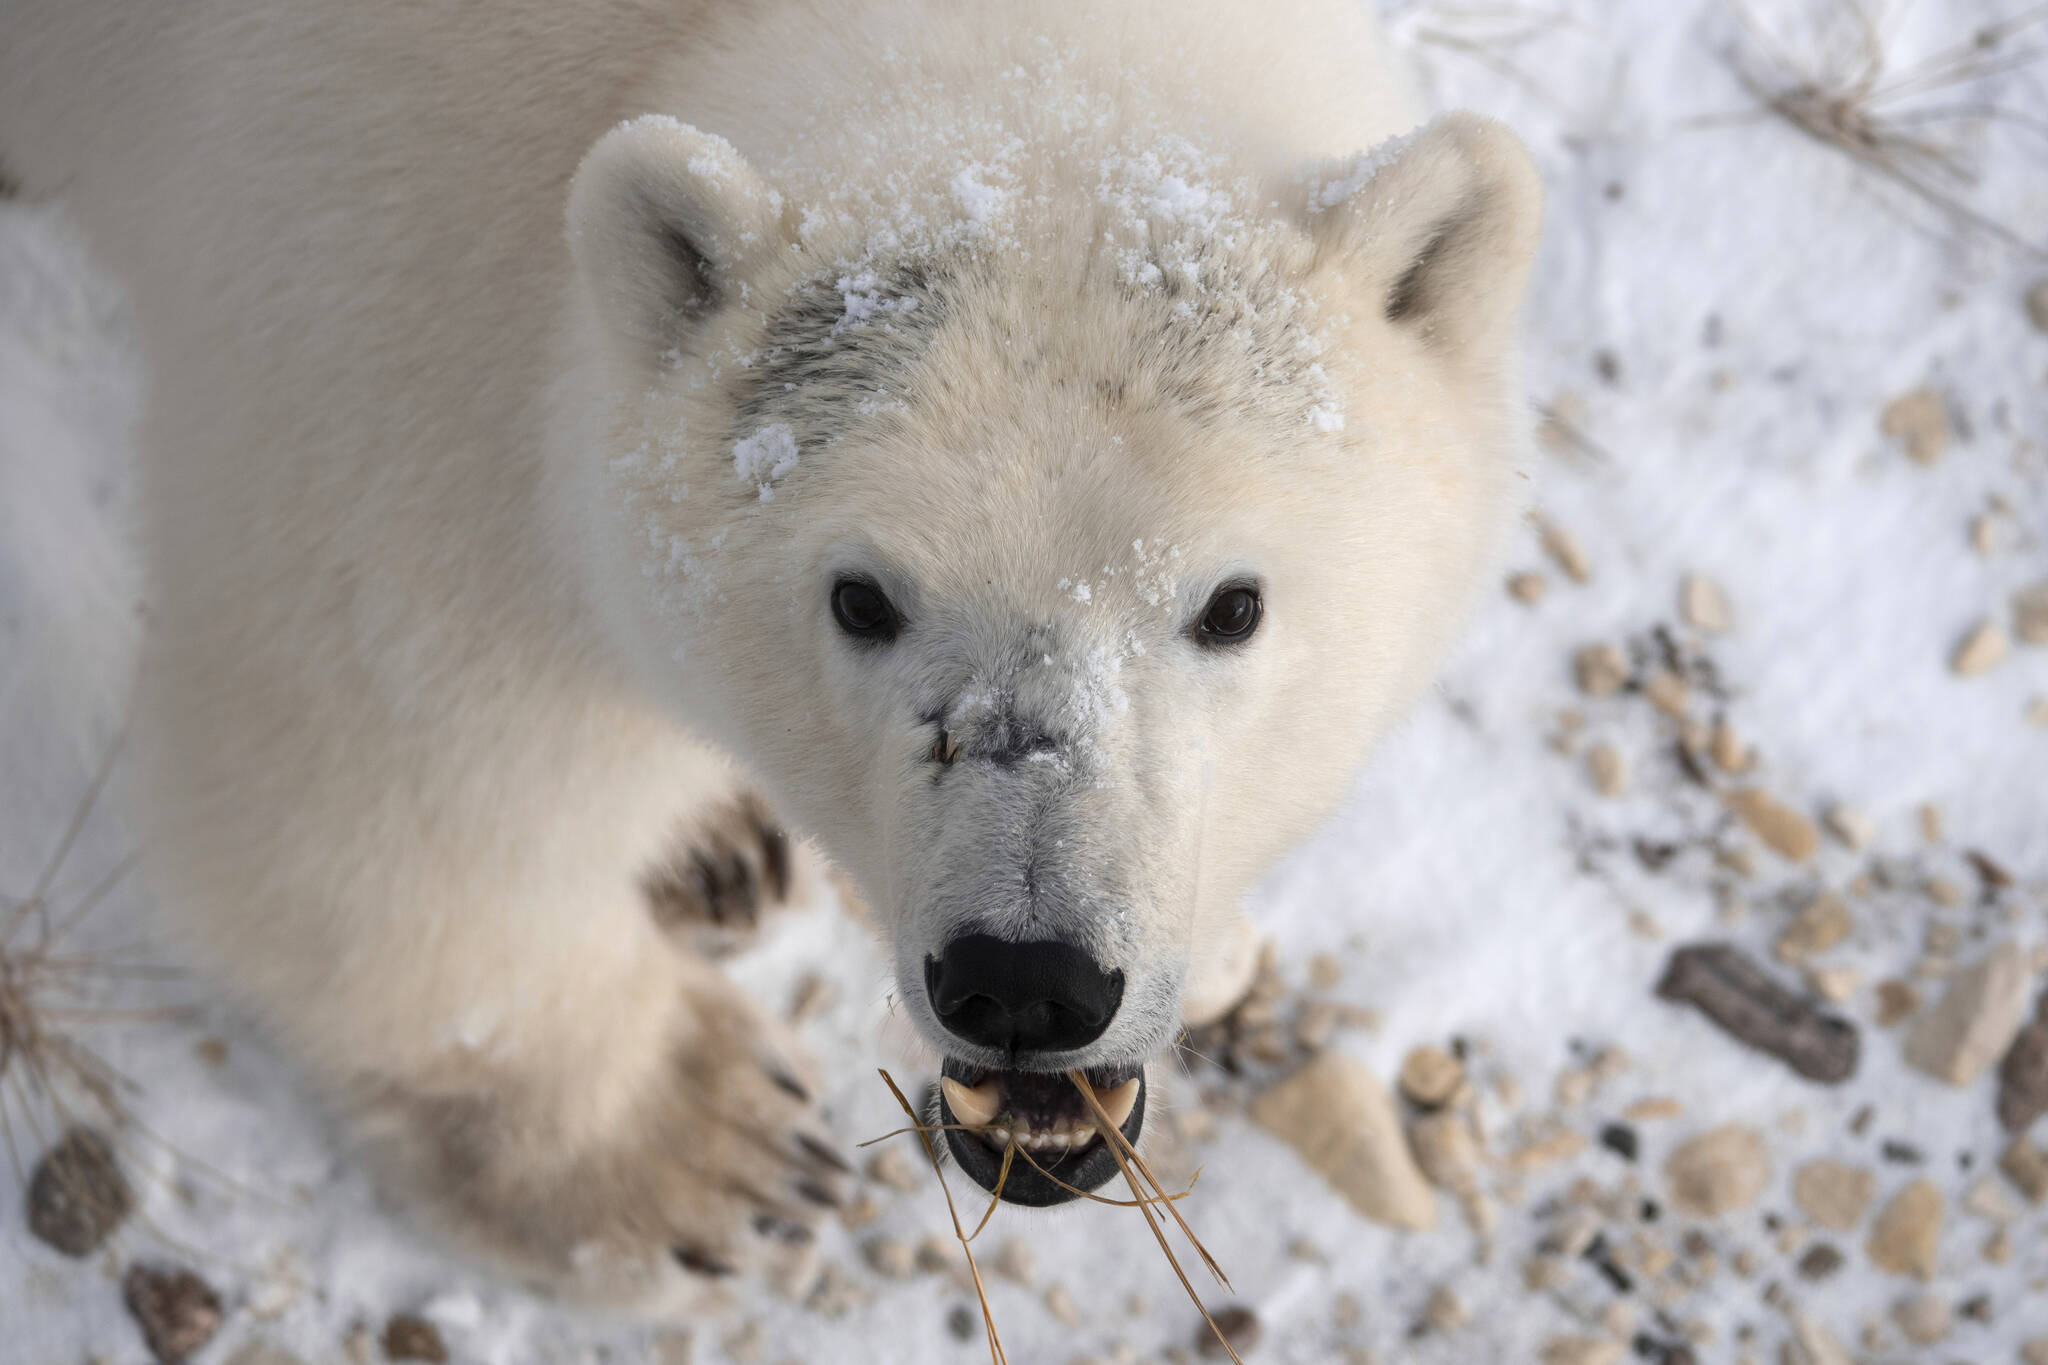 This 2020 photo provided by Polar Bears International shows a polar bear in Churchill, Manitoba, Canada during migration. At risk of disappearing, the polar bear is dependent on something melting away on our warming planet: sea ice. (Kieran McIver/Polar Bears International via AP)